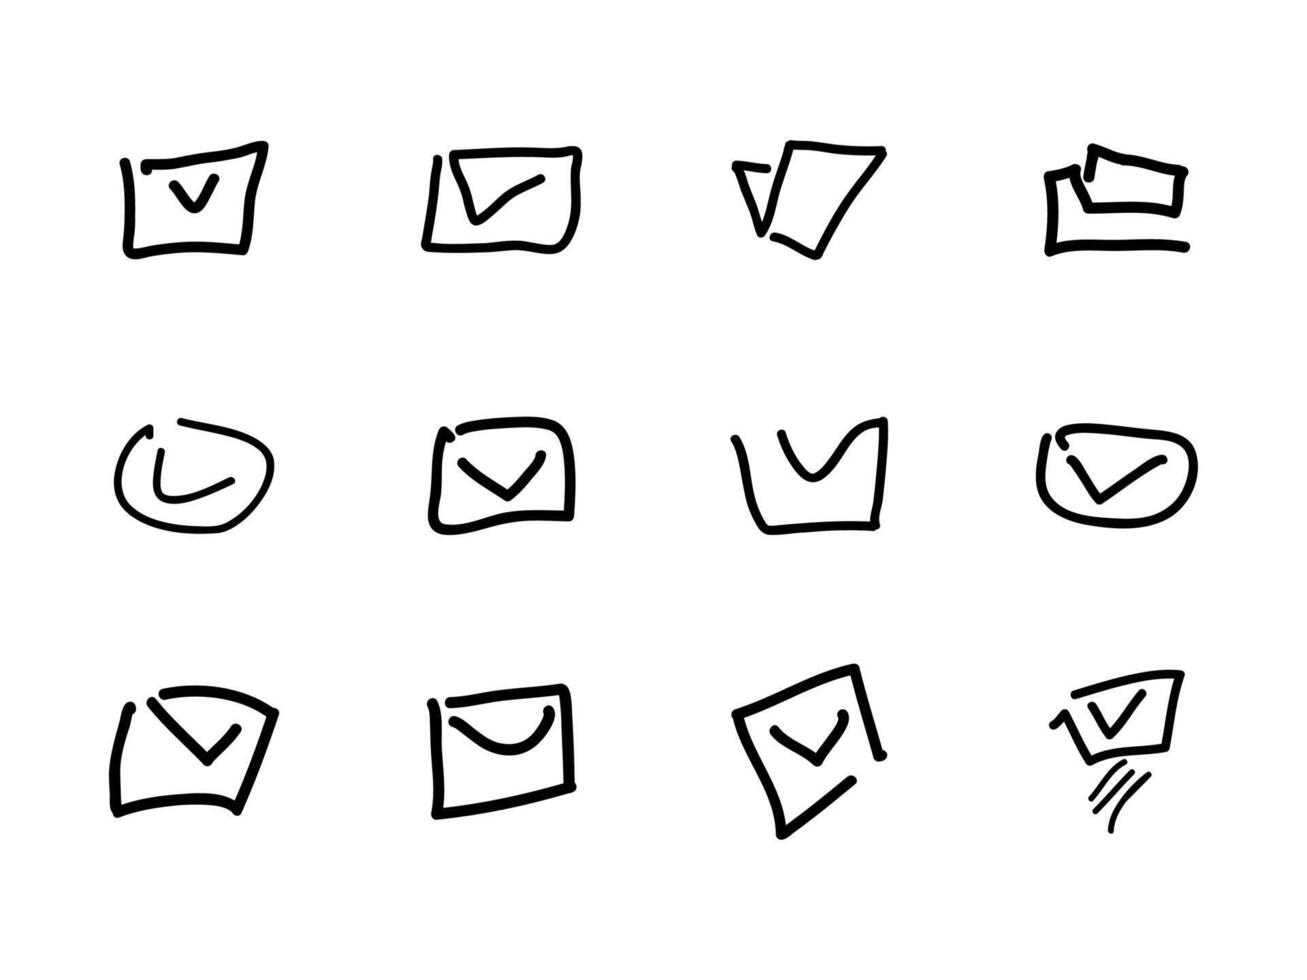 Set of hand-drawn-style icon illustrations with business, Email, and folder icons vector